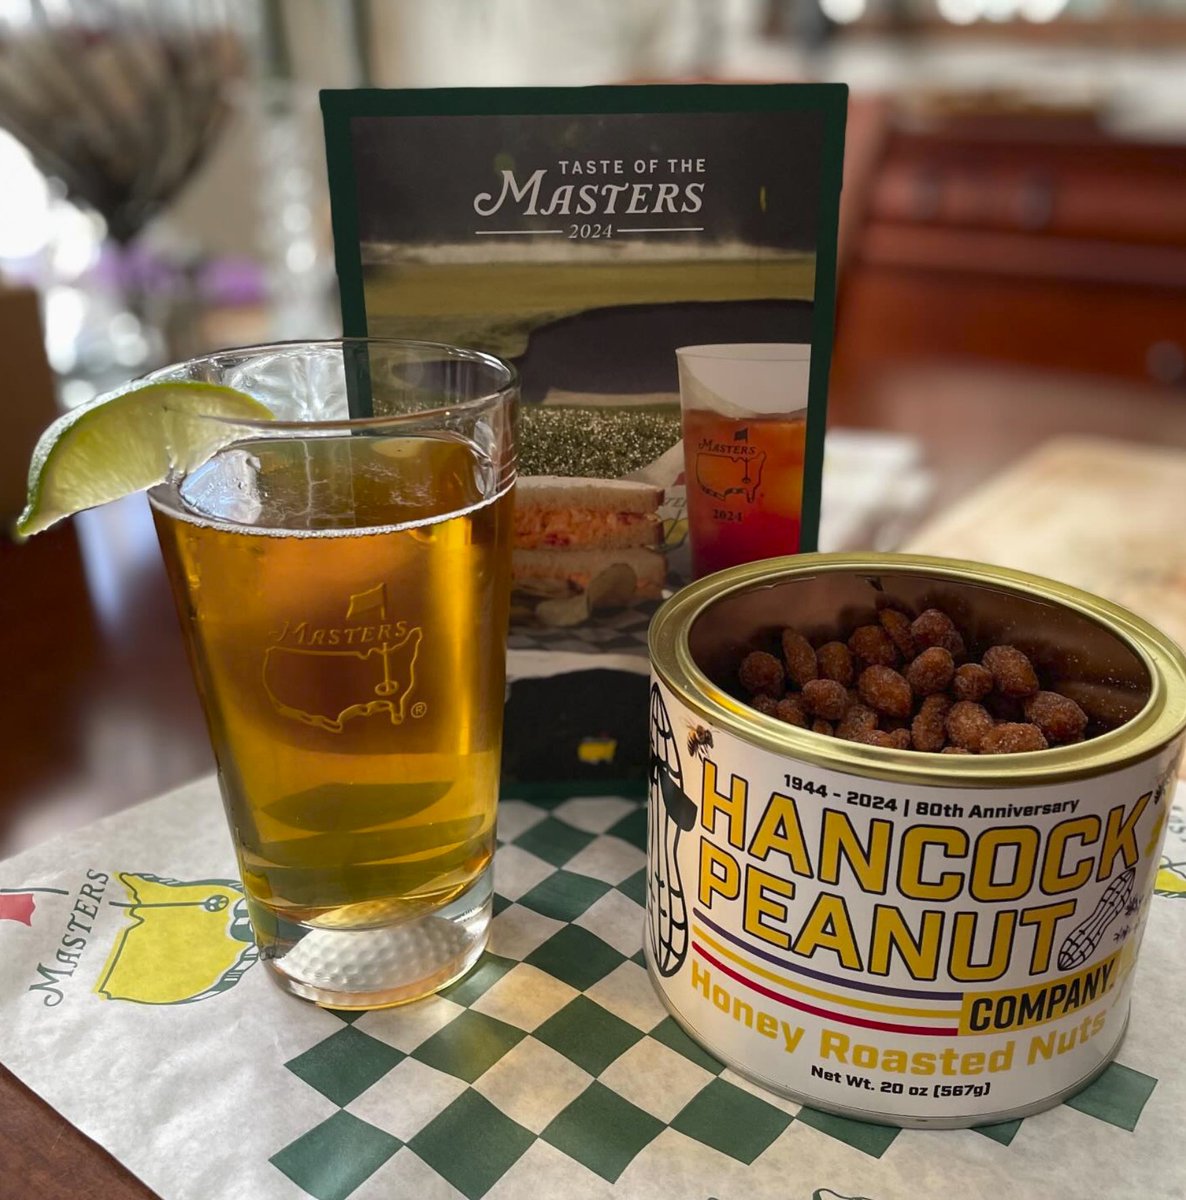 Enjoy the Final Round today! Who are you pulling for? Stock up with our golf themed kit: hancockpeanuts.com/product/birdie… #tasteofthemasters #hancockpeanuts #honeyroastedpeanuts #themasters #golf #sunday #masters #havefun @TheMasters